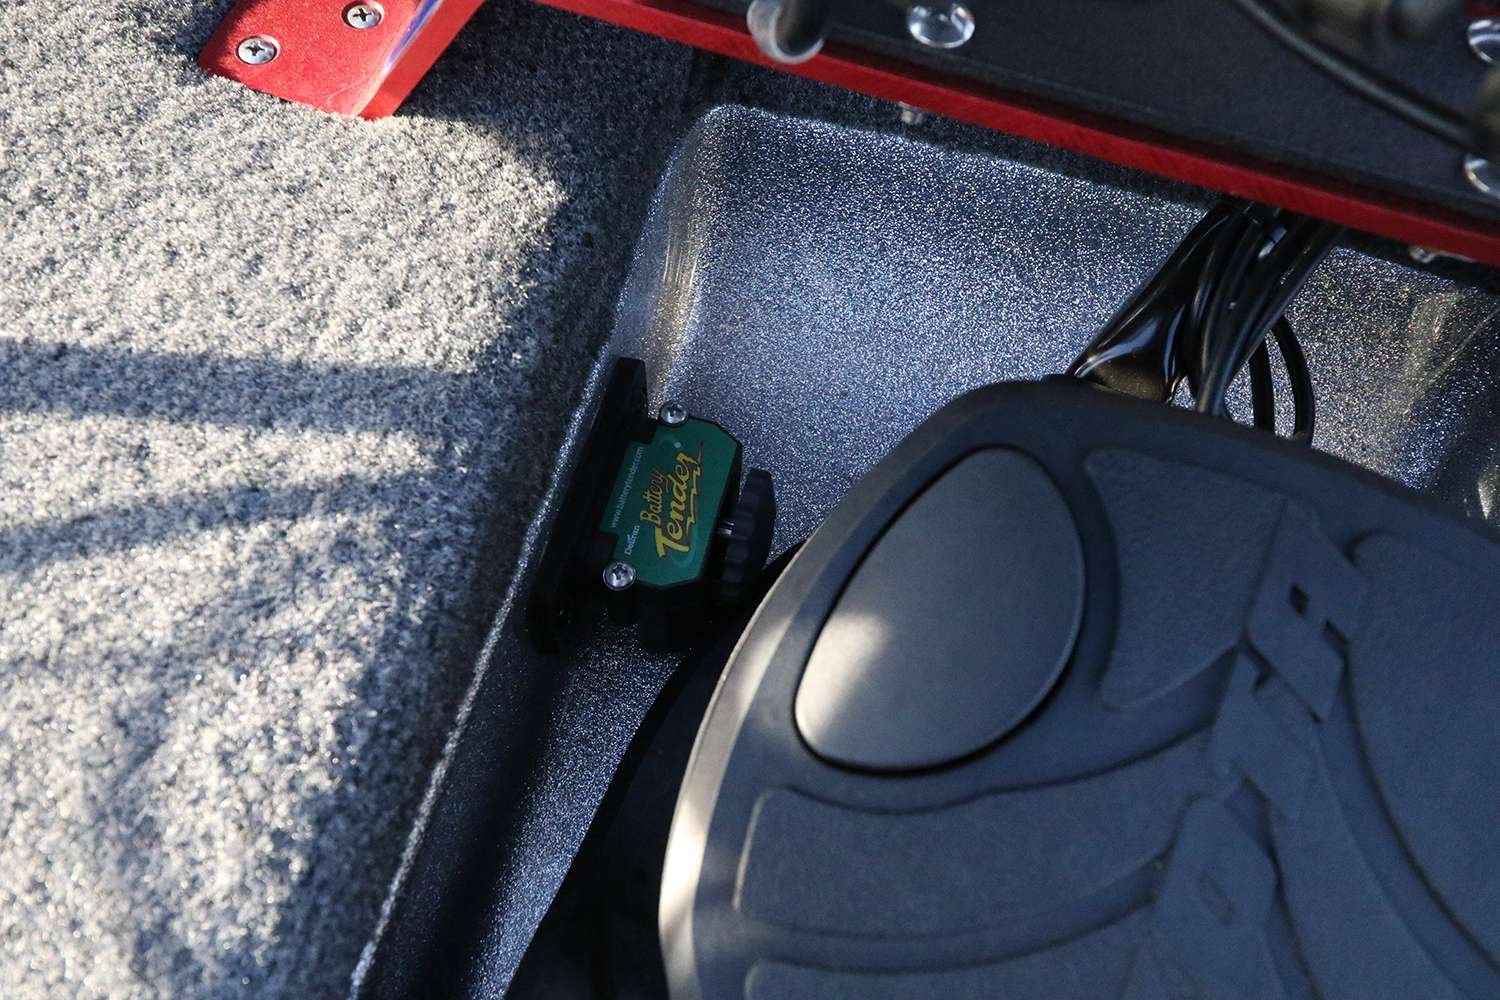 Inside the recessed foot pedal area is a power switch for the trolling motor batteries. 